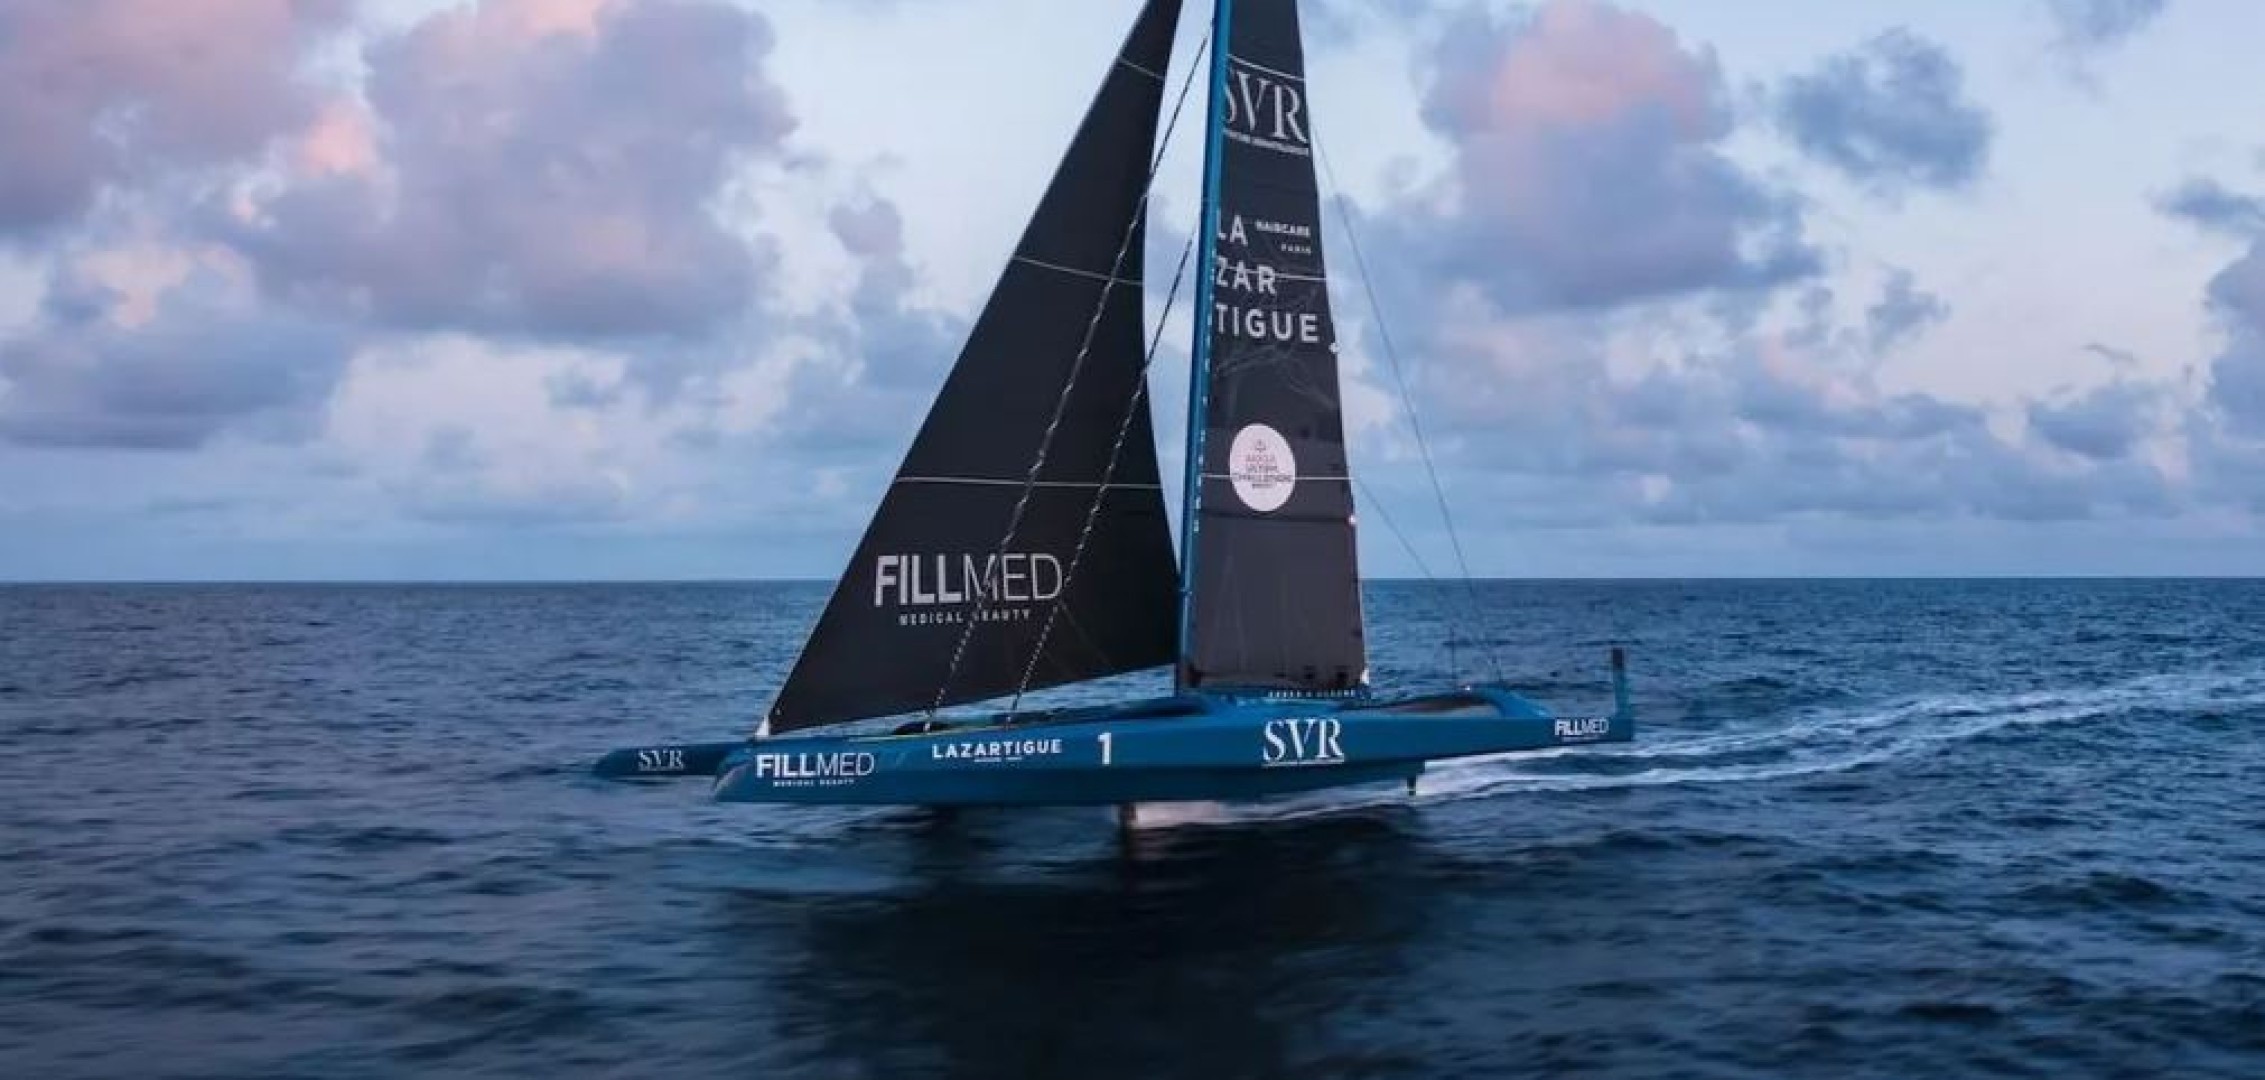 Arkea Ultim Challenge: Le Cléac'h and Marchand heading into the Indian Ocean